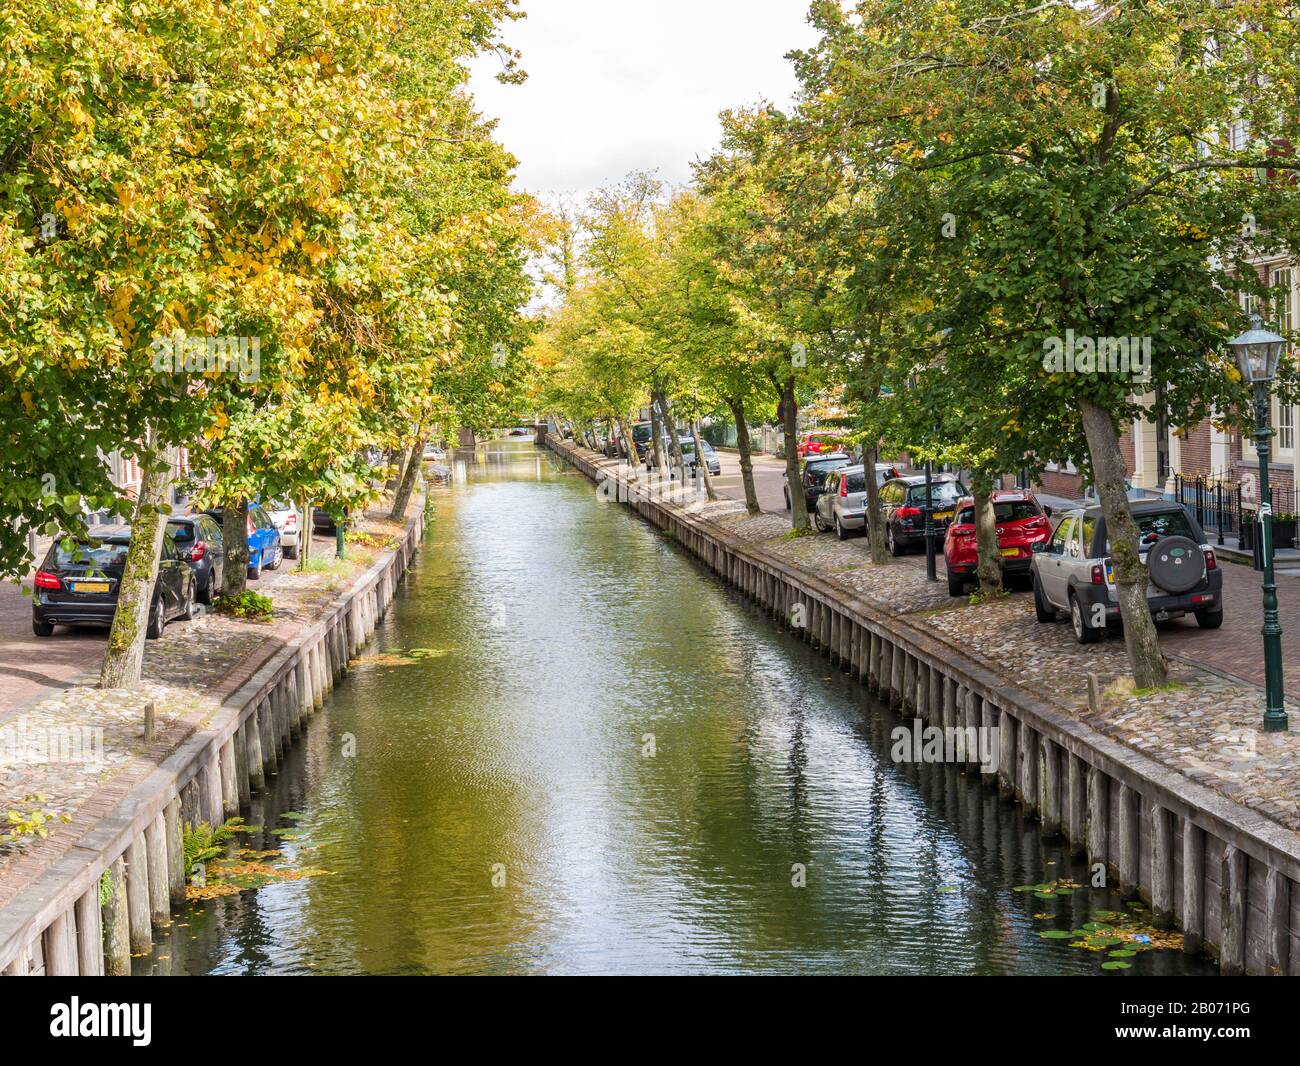 Rows of trees along Voorhaven canal in Edam, Noord-Holland, Netherlands Stock Photo